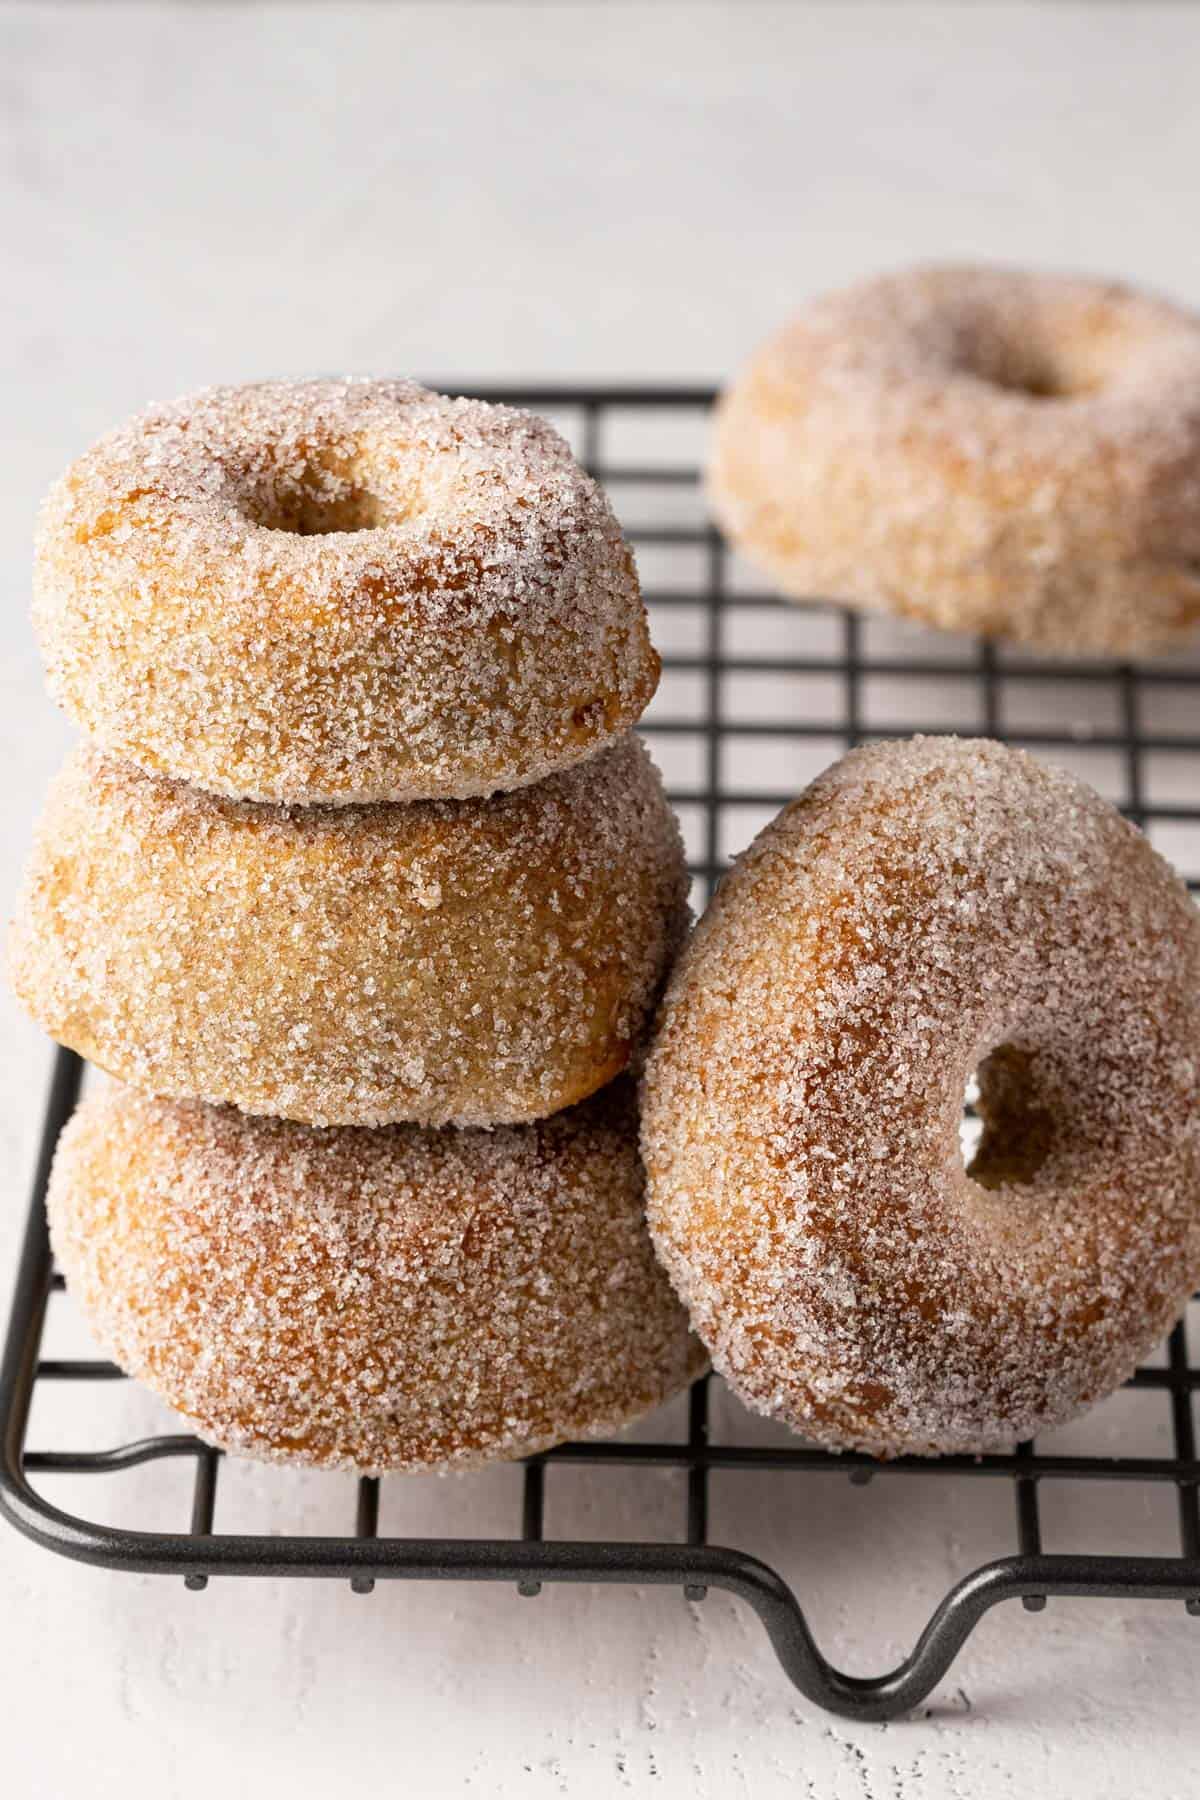 A stack of whole wheat air fryer donuts